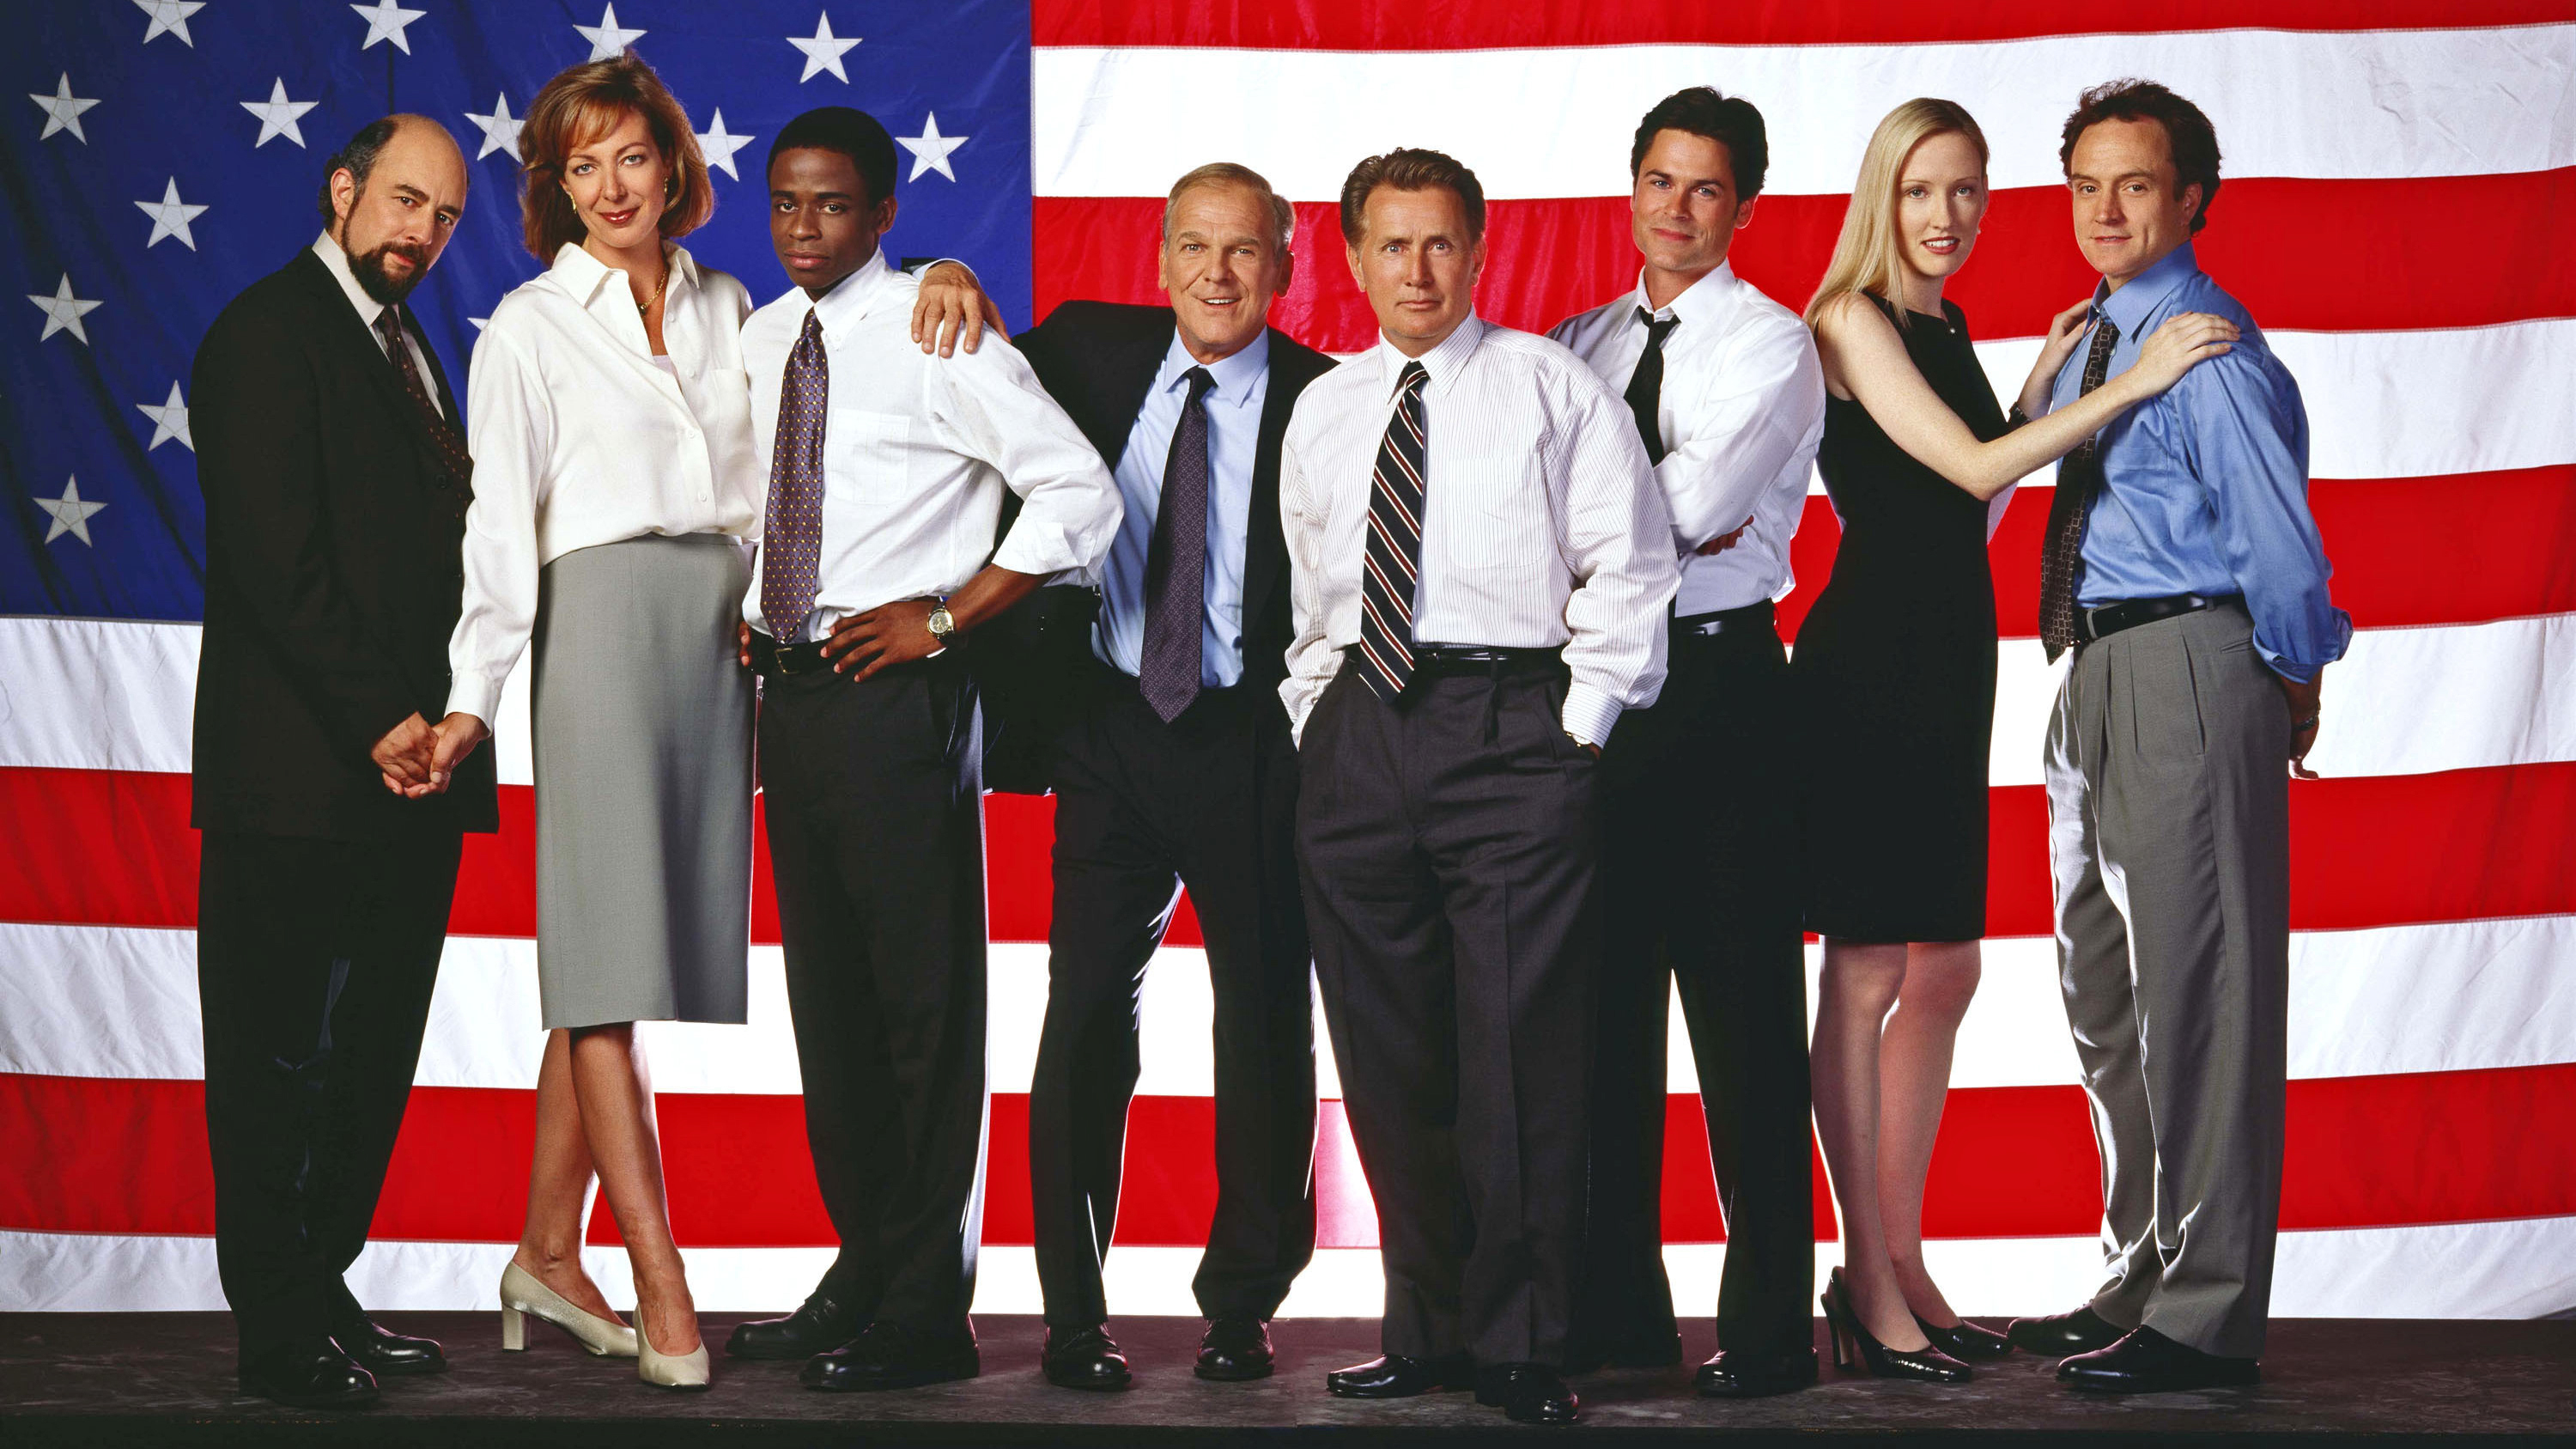 The West Wing Images. 